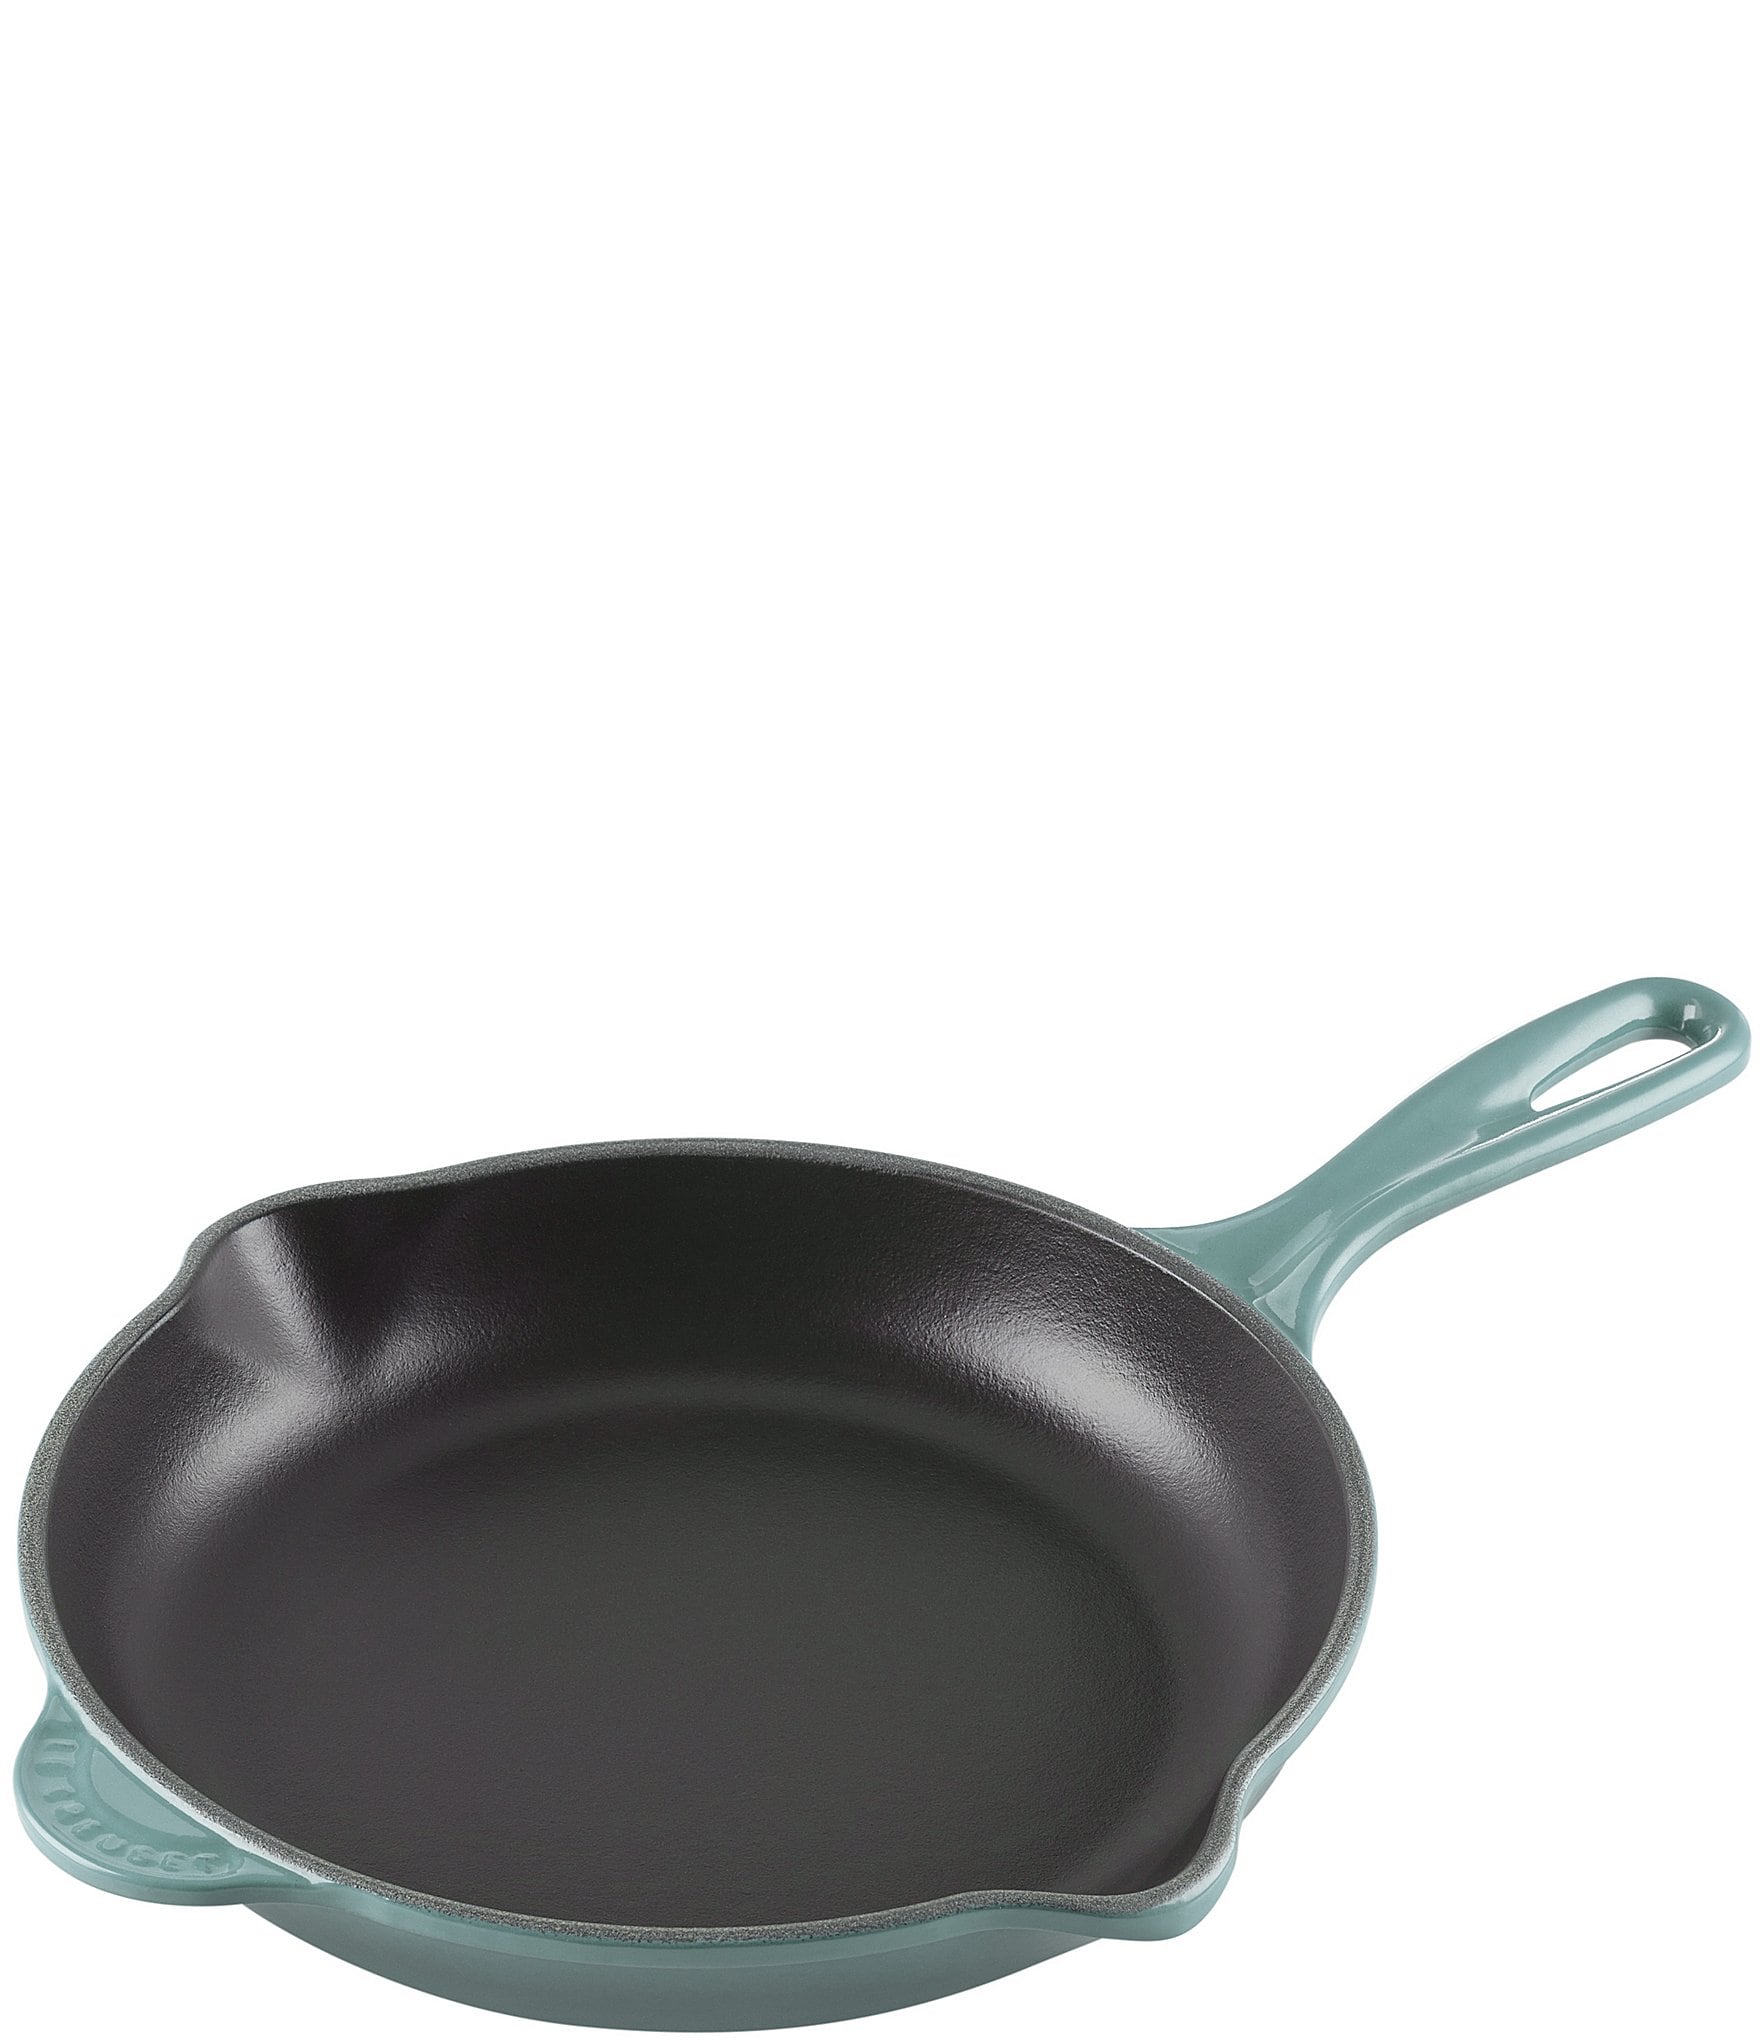 Le Creuset Classic 9 Chambray Enameled Cast Iron Skillet + Reviews